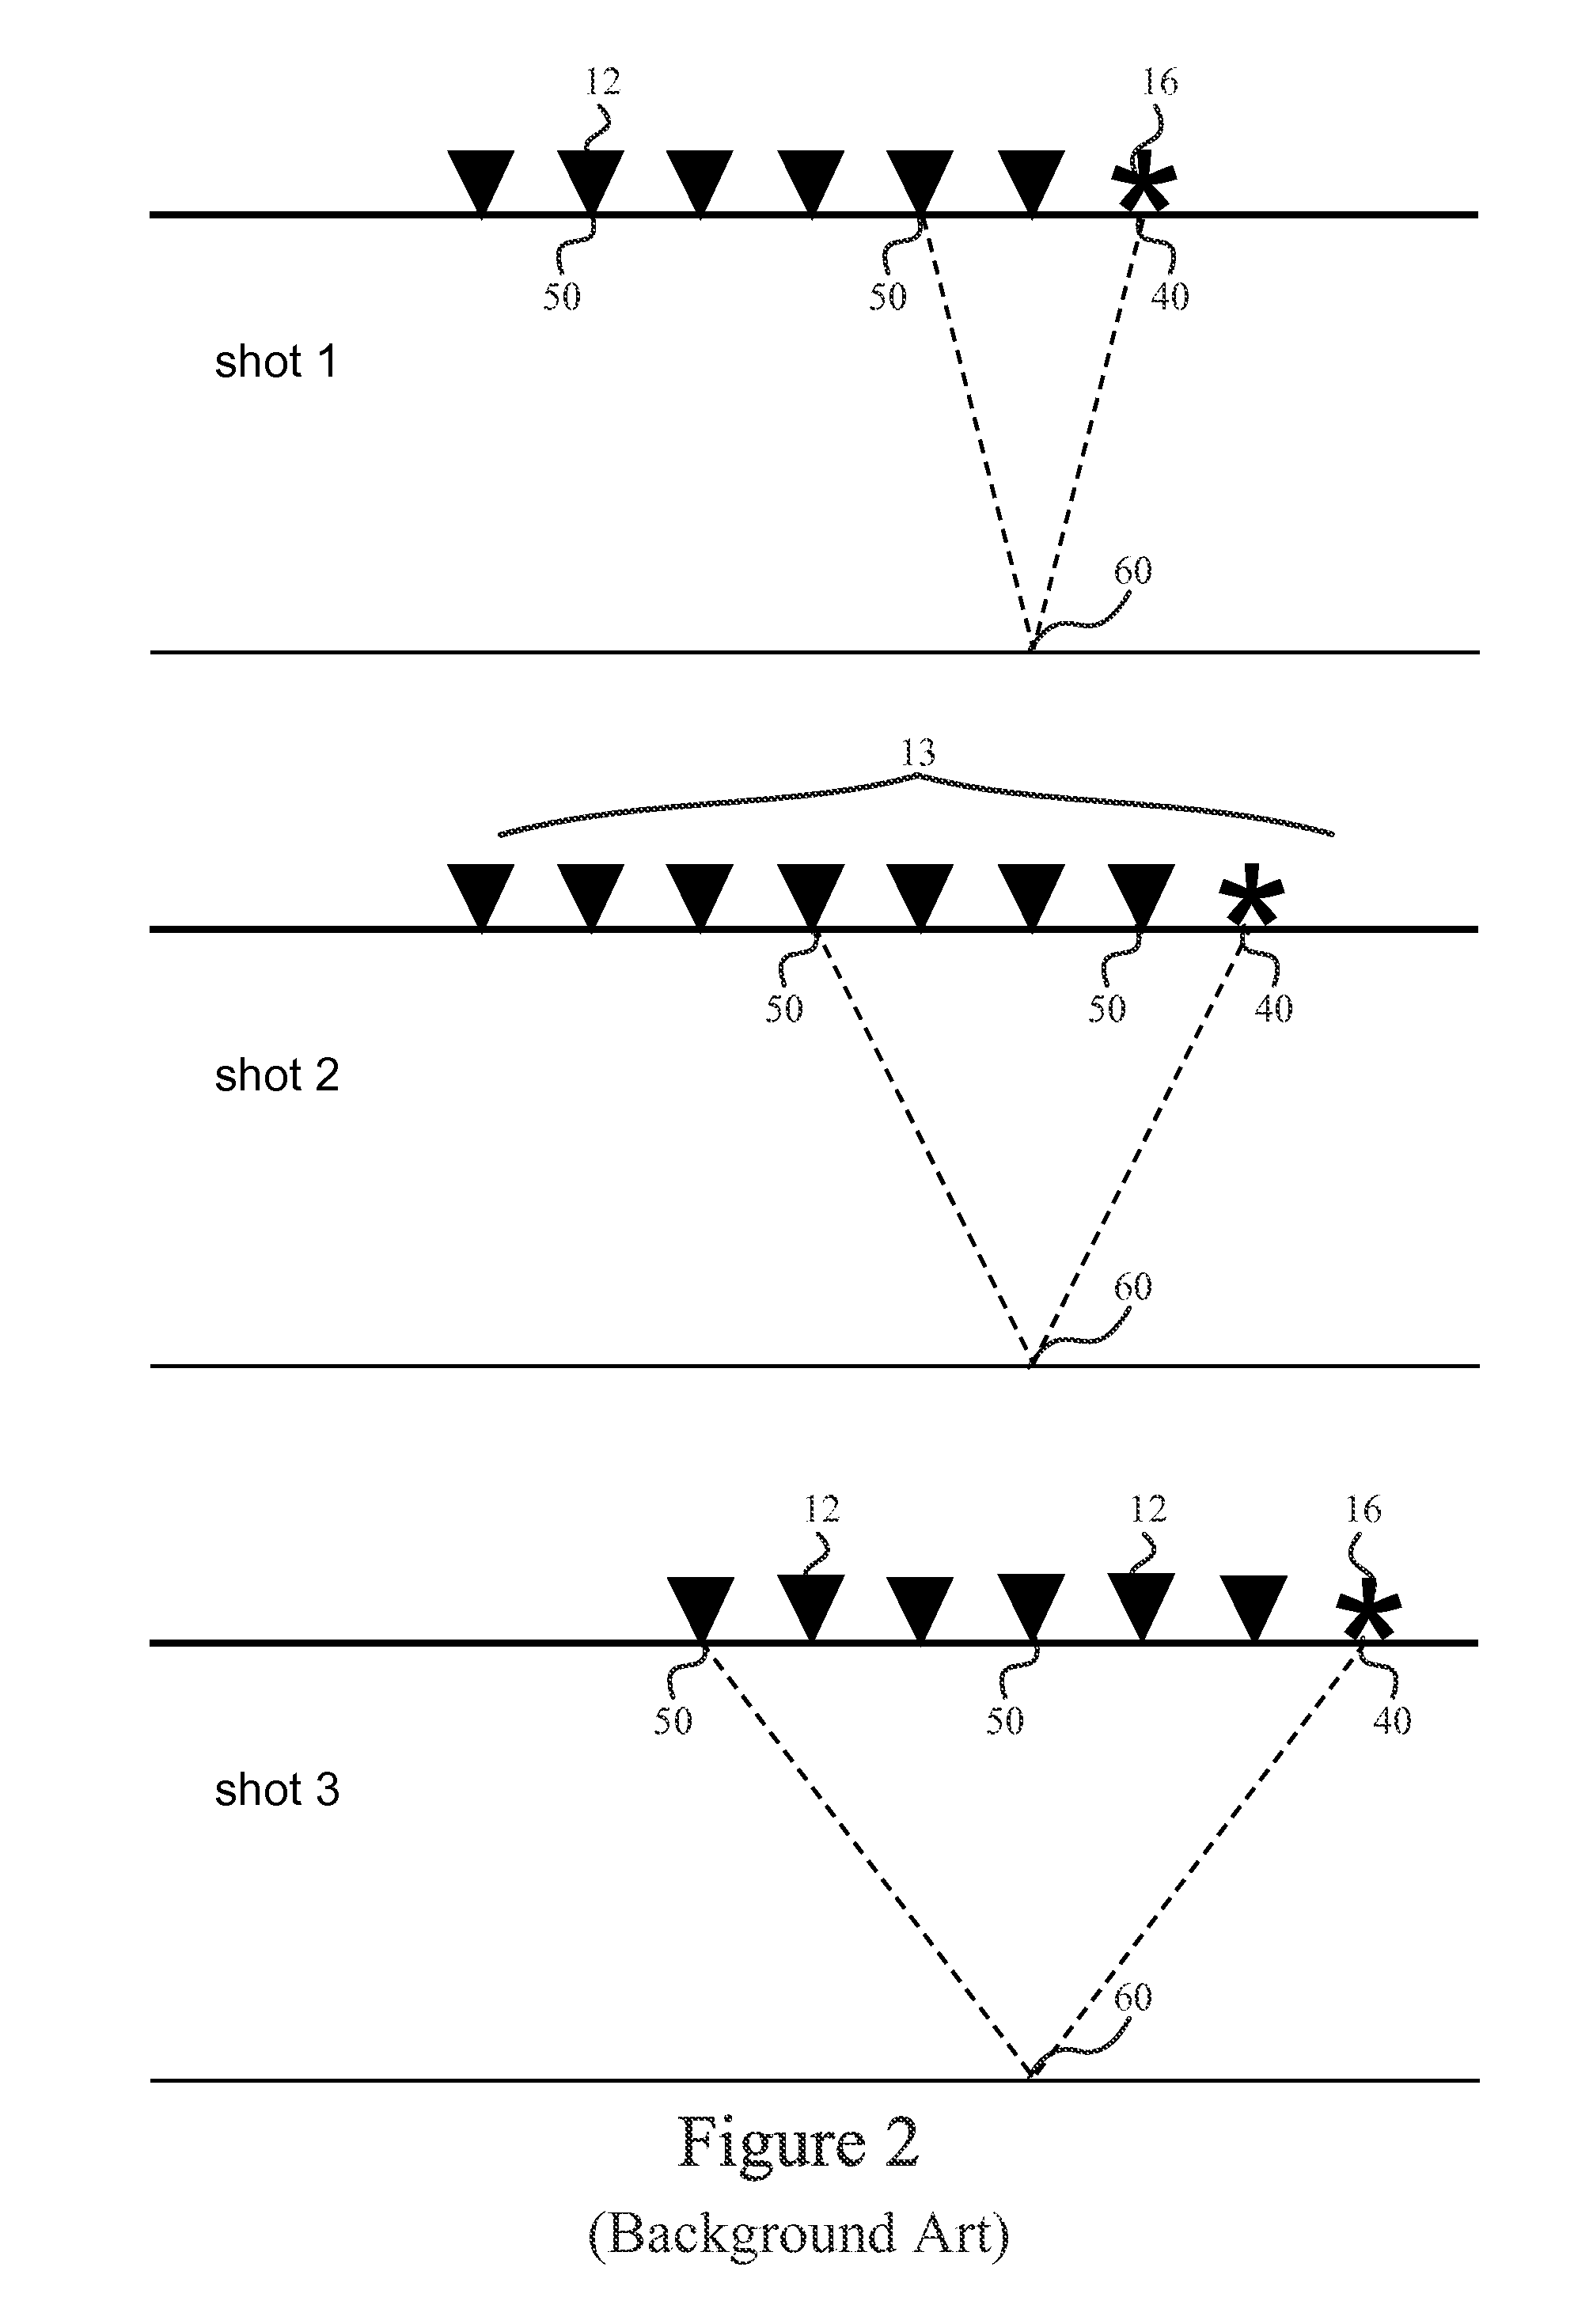 Spatial expansion seismic data processing method and apparatus